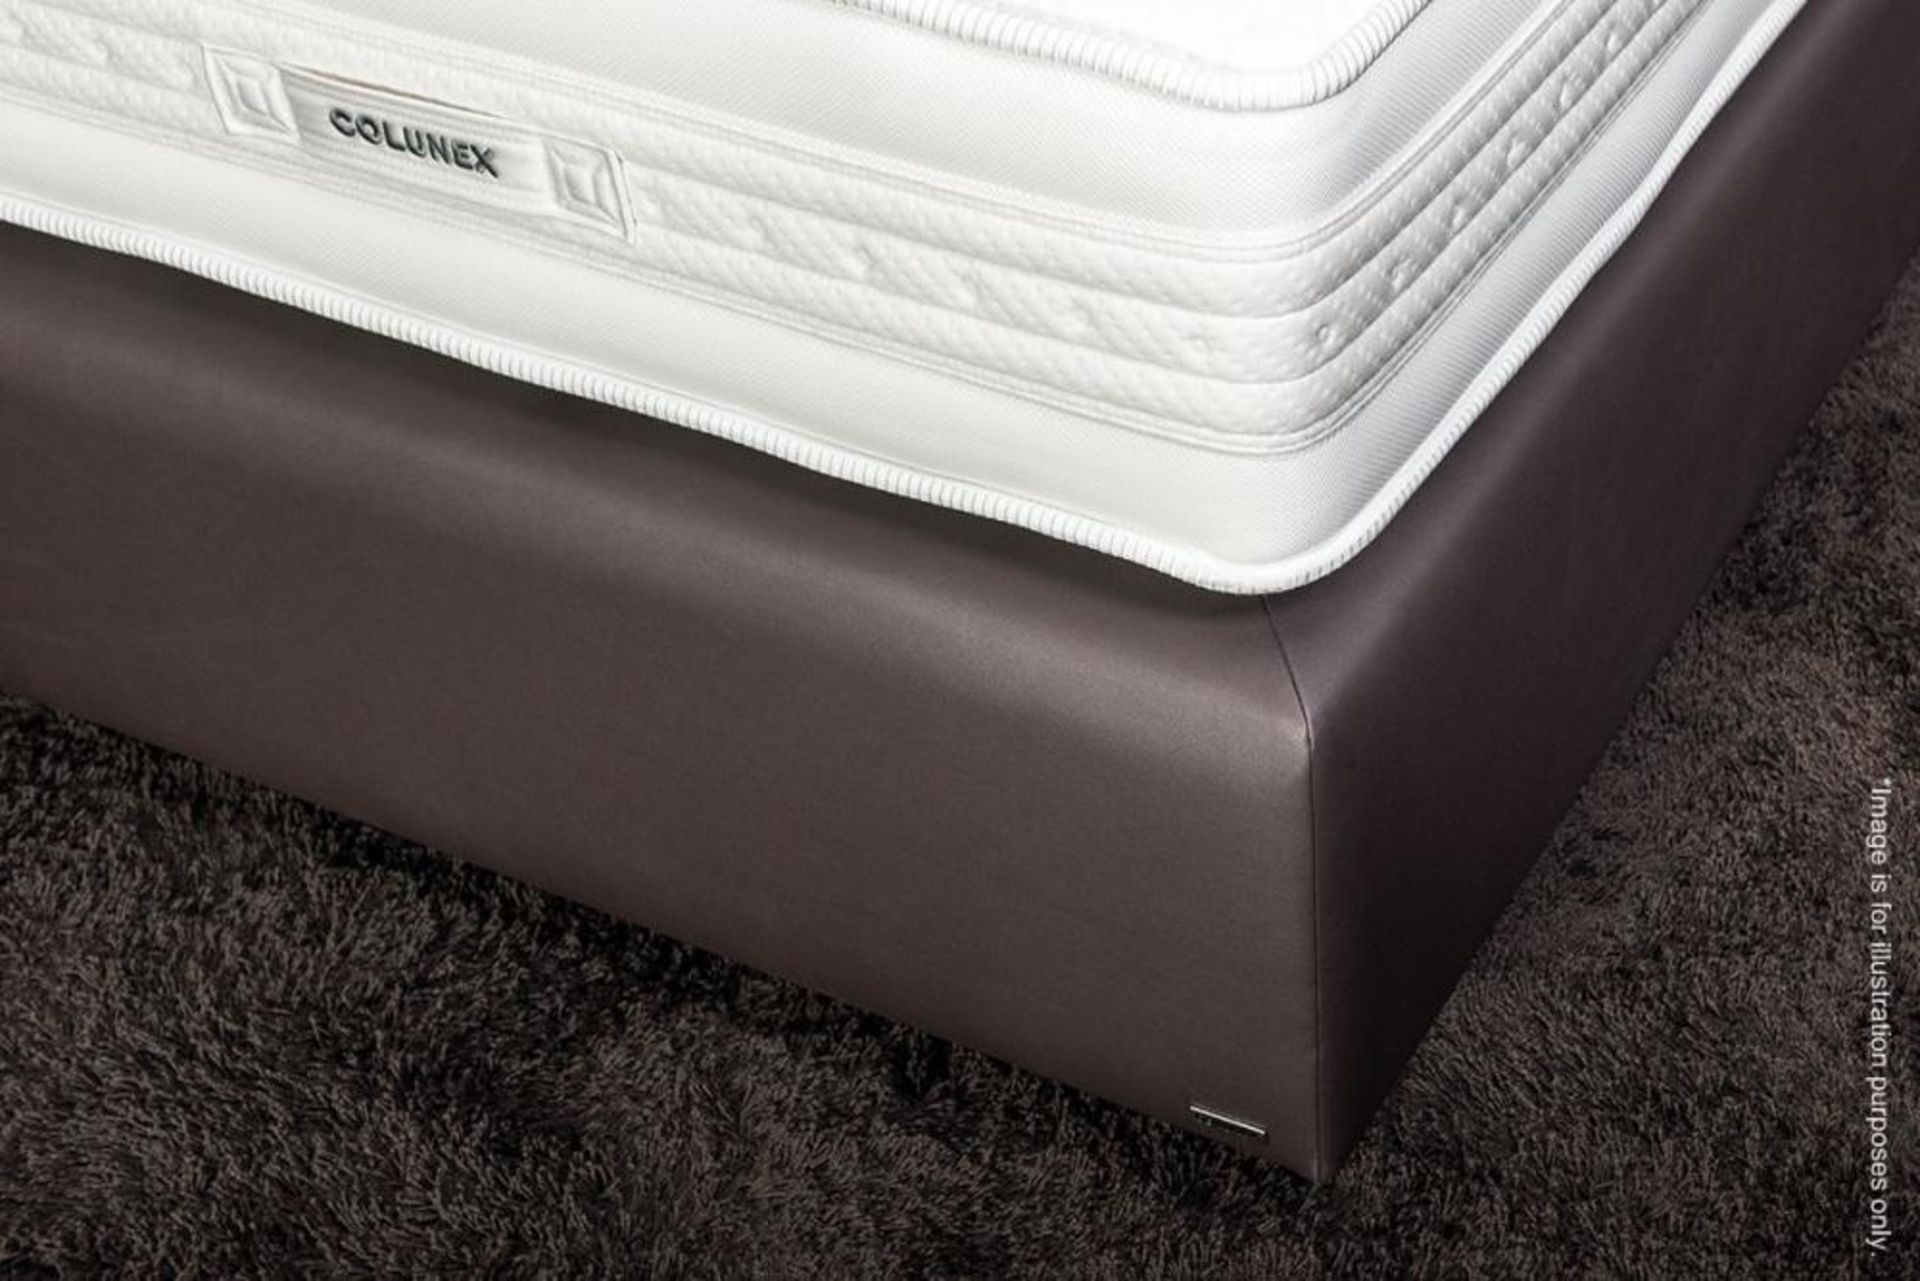 1 x Colunex 'Easy' Kingsize Bed Base - Upholstered In Grey Leather With Stylish Metal Feet - Dimensi - Image 2 of 10